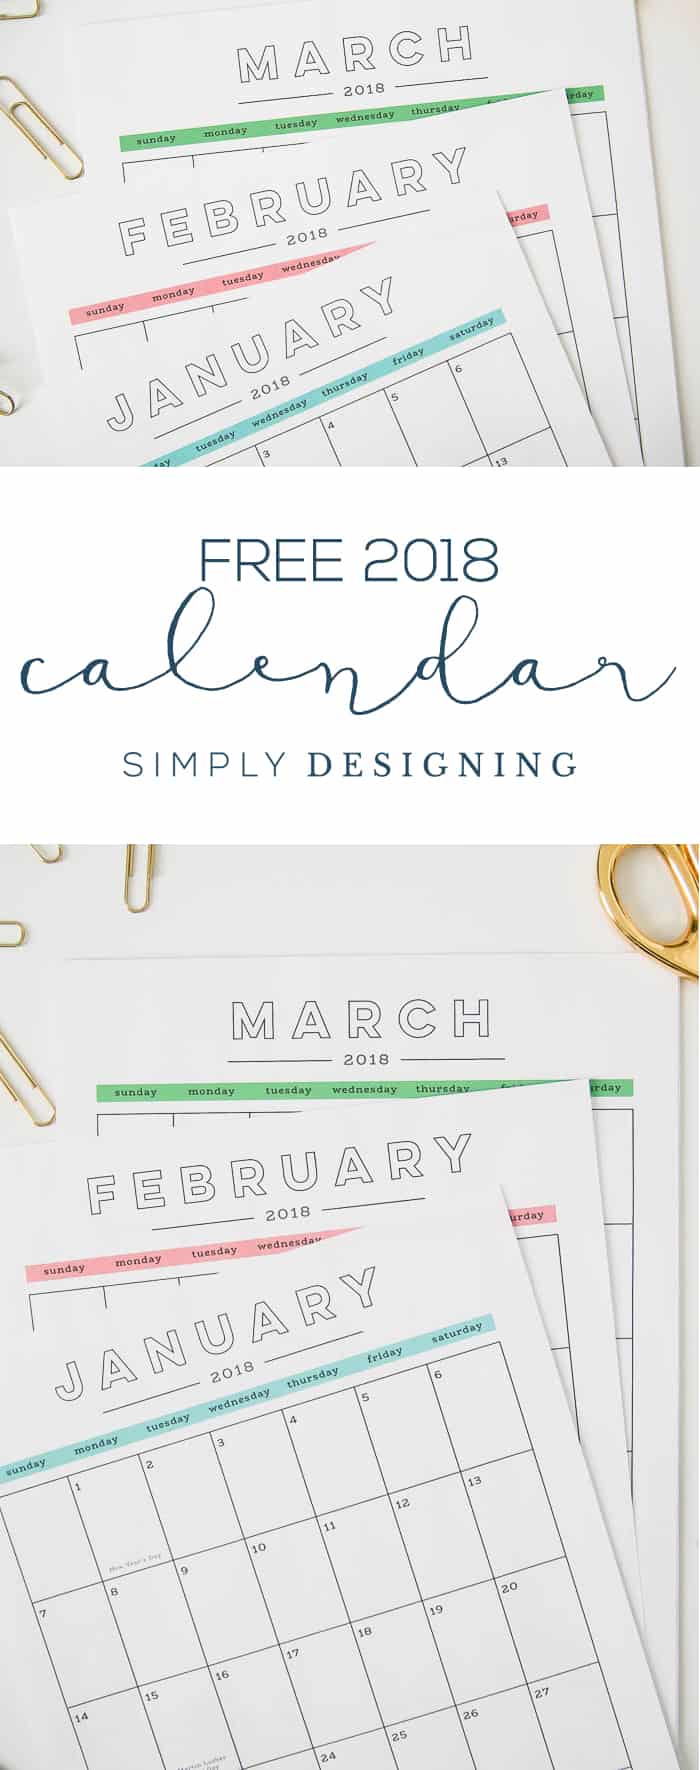 Free 2018 Calendar - monthly calendar that you can print from home for all of 2018 - printable calendar